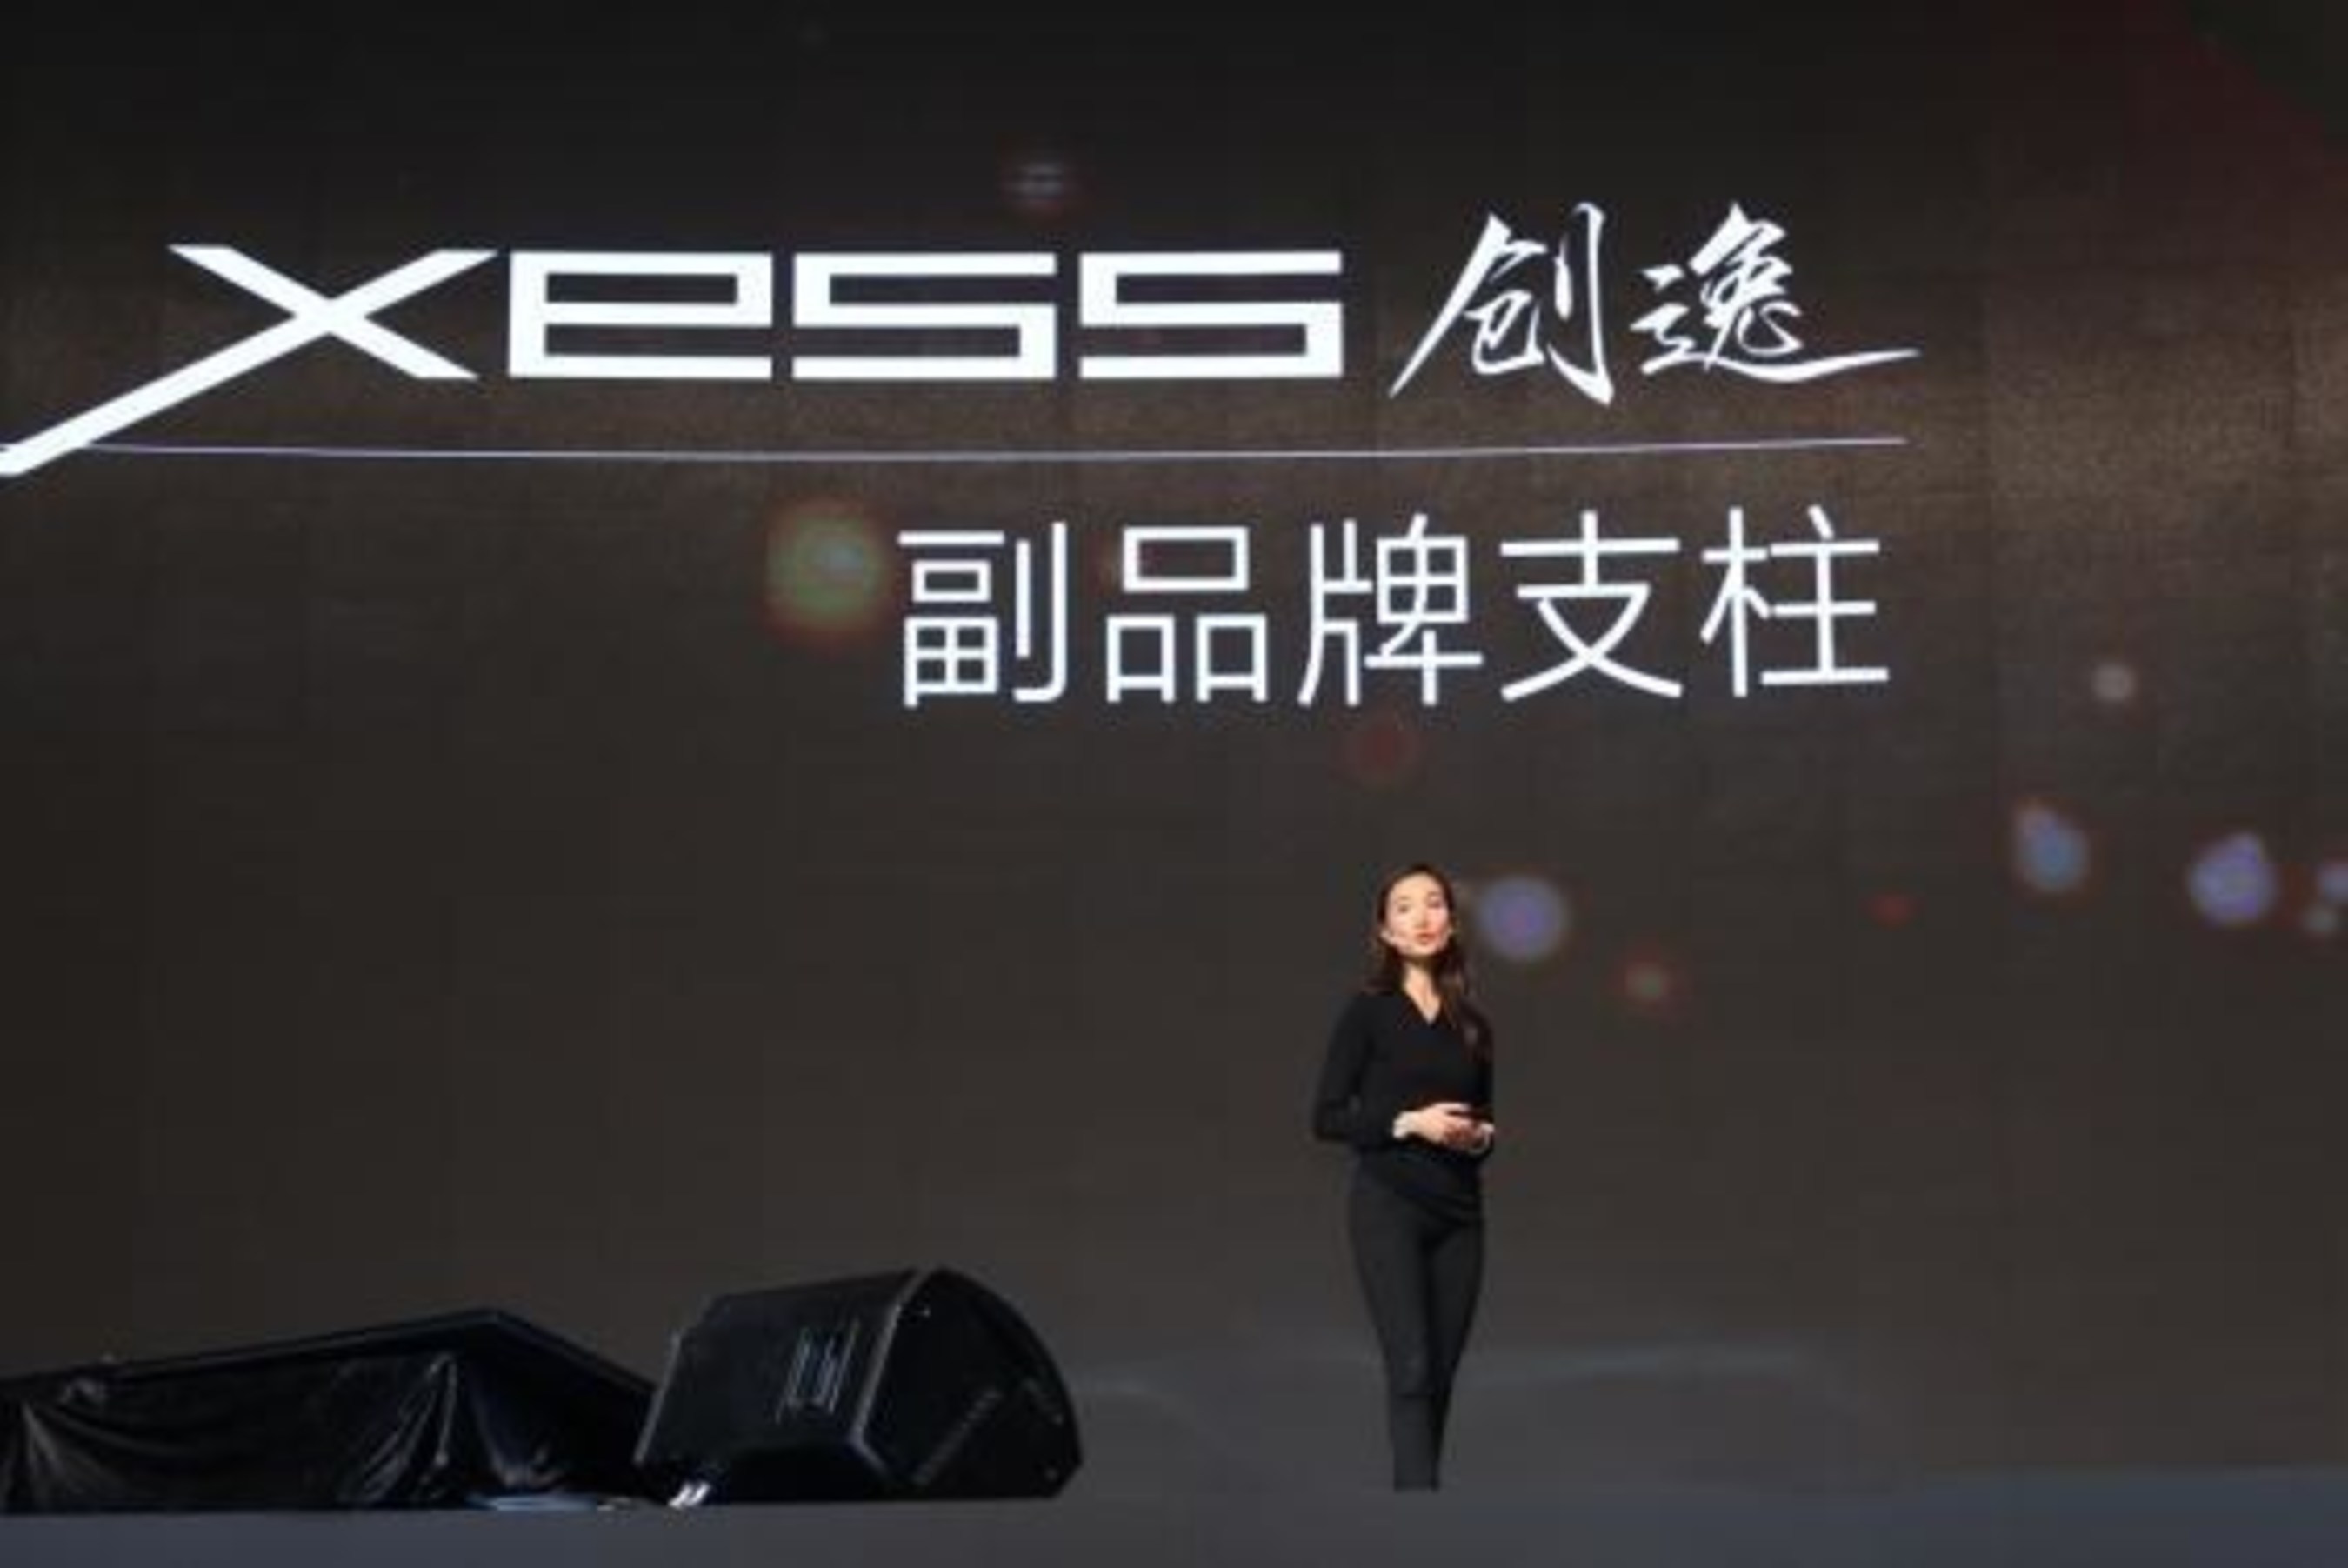 Alice Lee, general manager of the Brand Management Center at TCL Group, provides a detailed explanation of the XESS concept